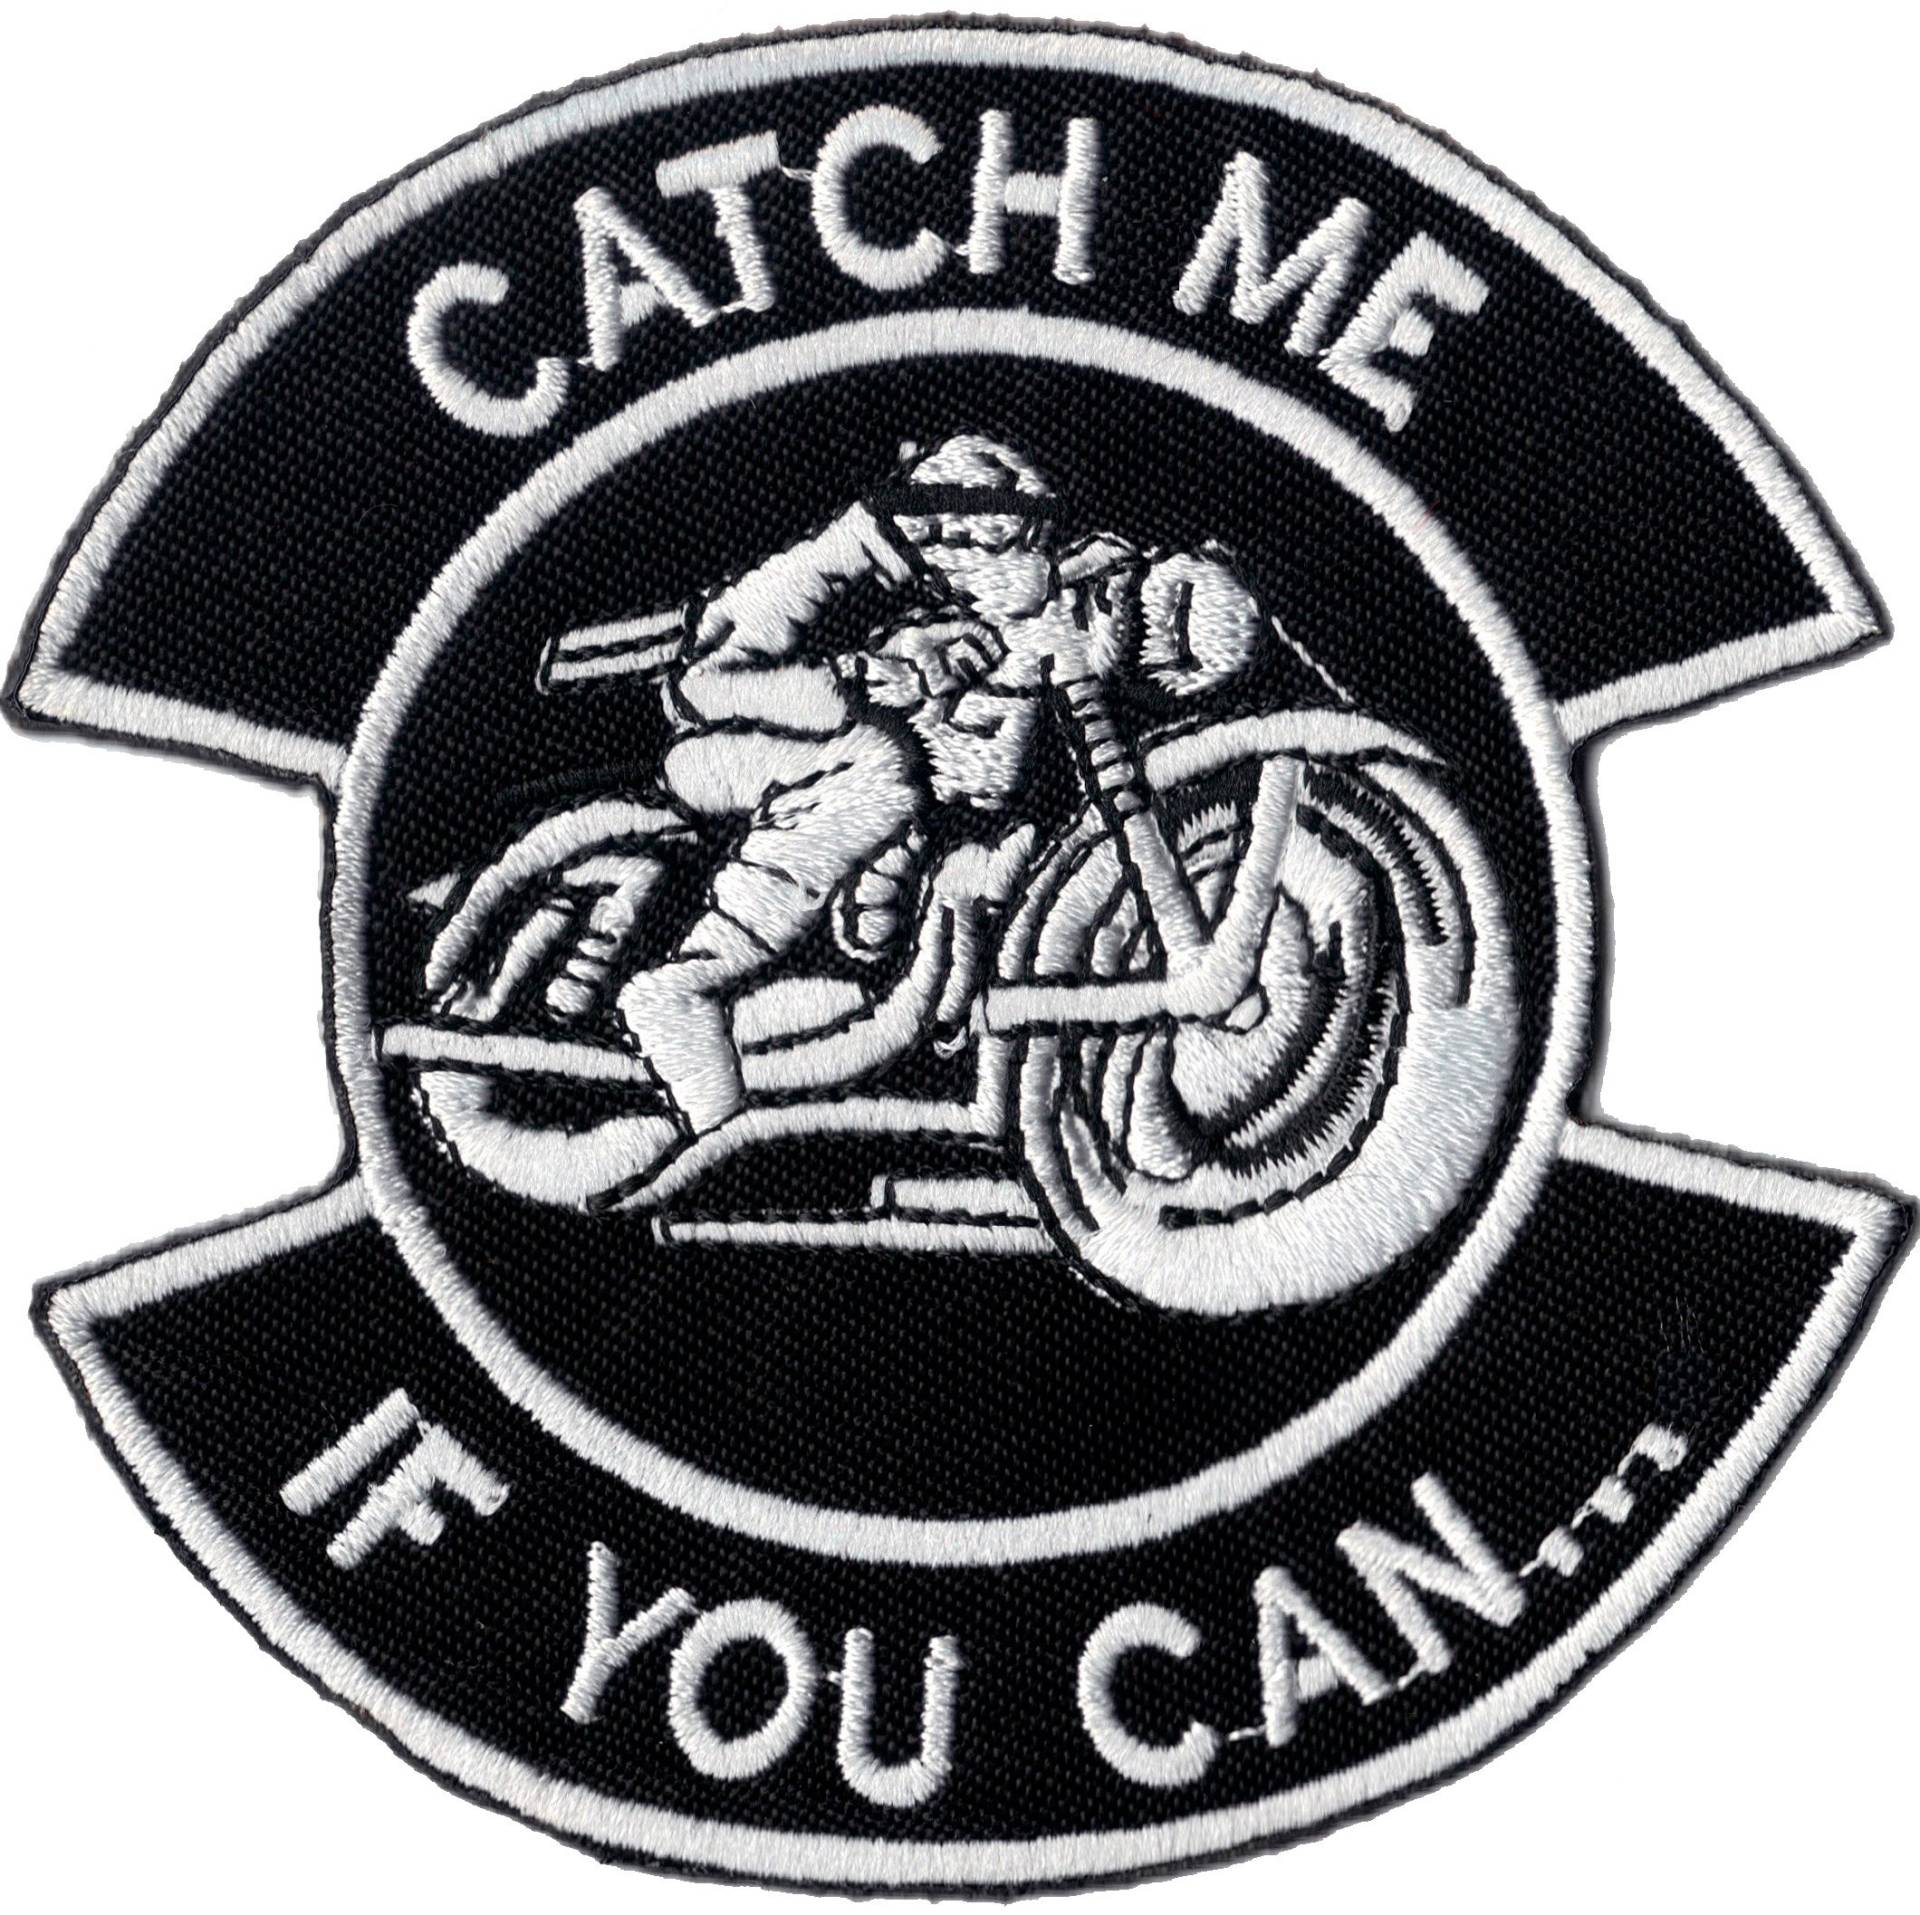 Patch Catch Me if You can Cafe Racer Motorcycle MC Biker Aufnäher Abzeichen von Patch